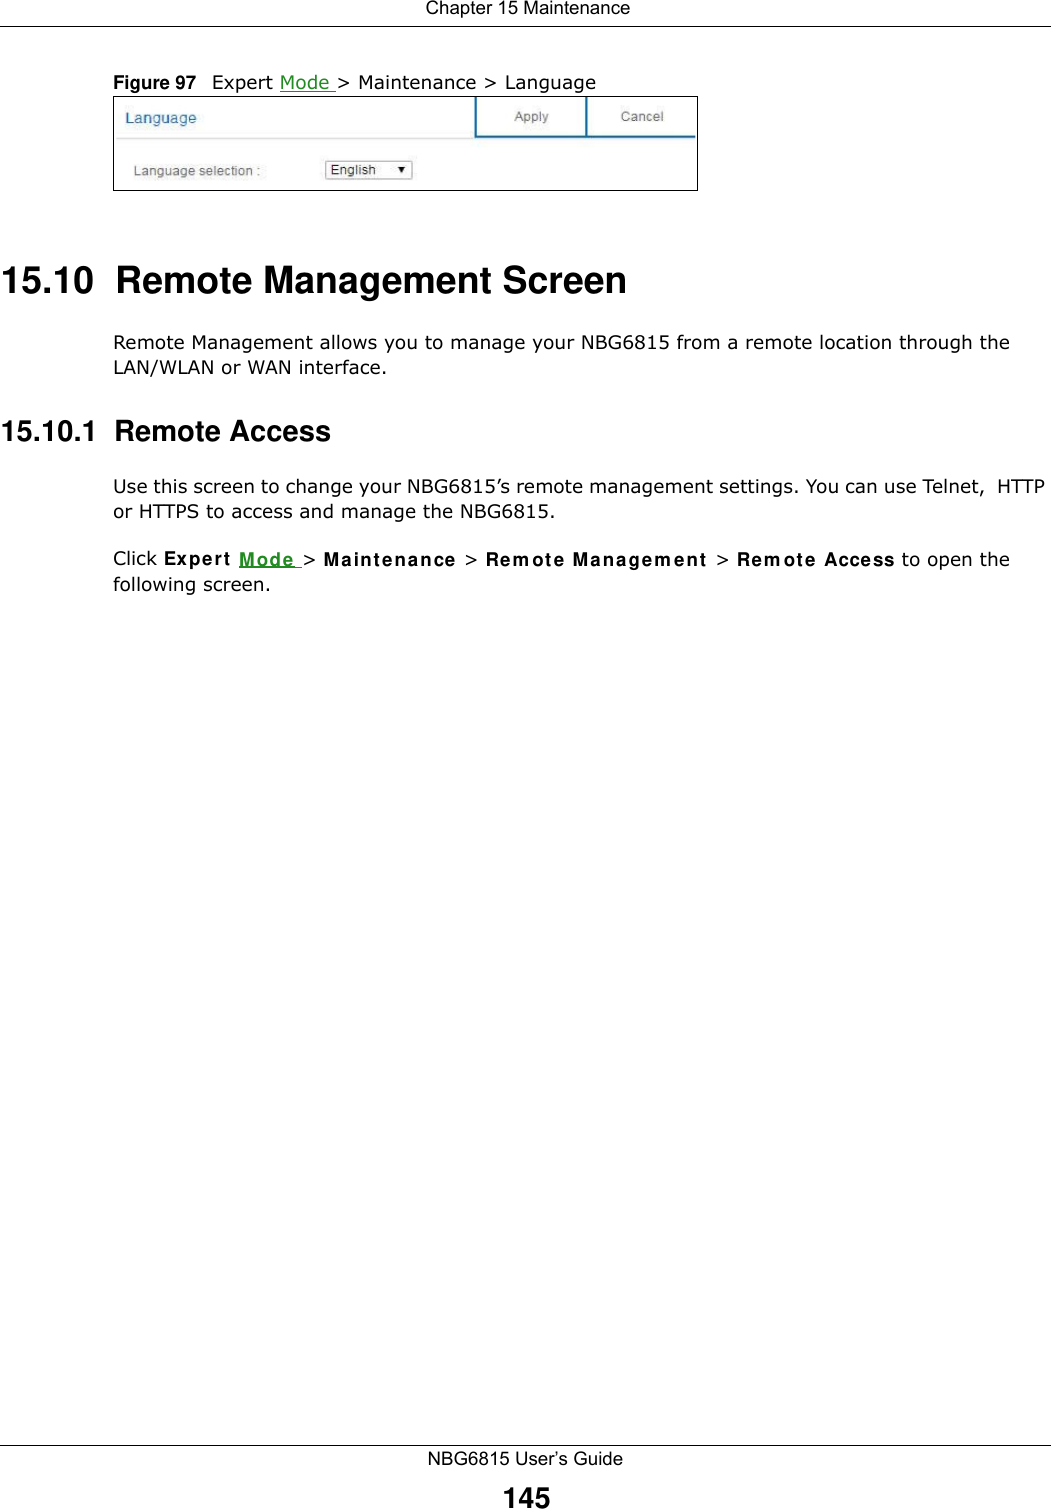  Chapter 15 MaintenanceNBG6815 User’s Guide145Figure 97   Expert Mode &gt; Maintenance &gt; Language 15.10  Remote Management ScreenRemote Management allows you to manage your NBG6815 from a remote location through the LAN/WLAN or WAN interface.15.10.1  Remote Access Use this screen to change your NBG6815’s remote management settings. You can use Telnet,  HTTP or HTTPS to access and manage the NBG6815. Click Expert Mode &gt; Maintenance &gt; Remote Management &gt; Remote Access to open the following screen.